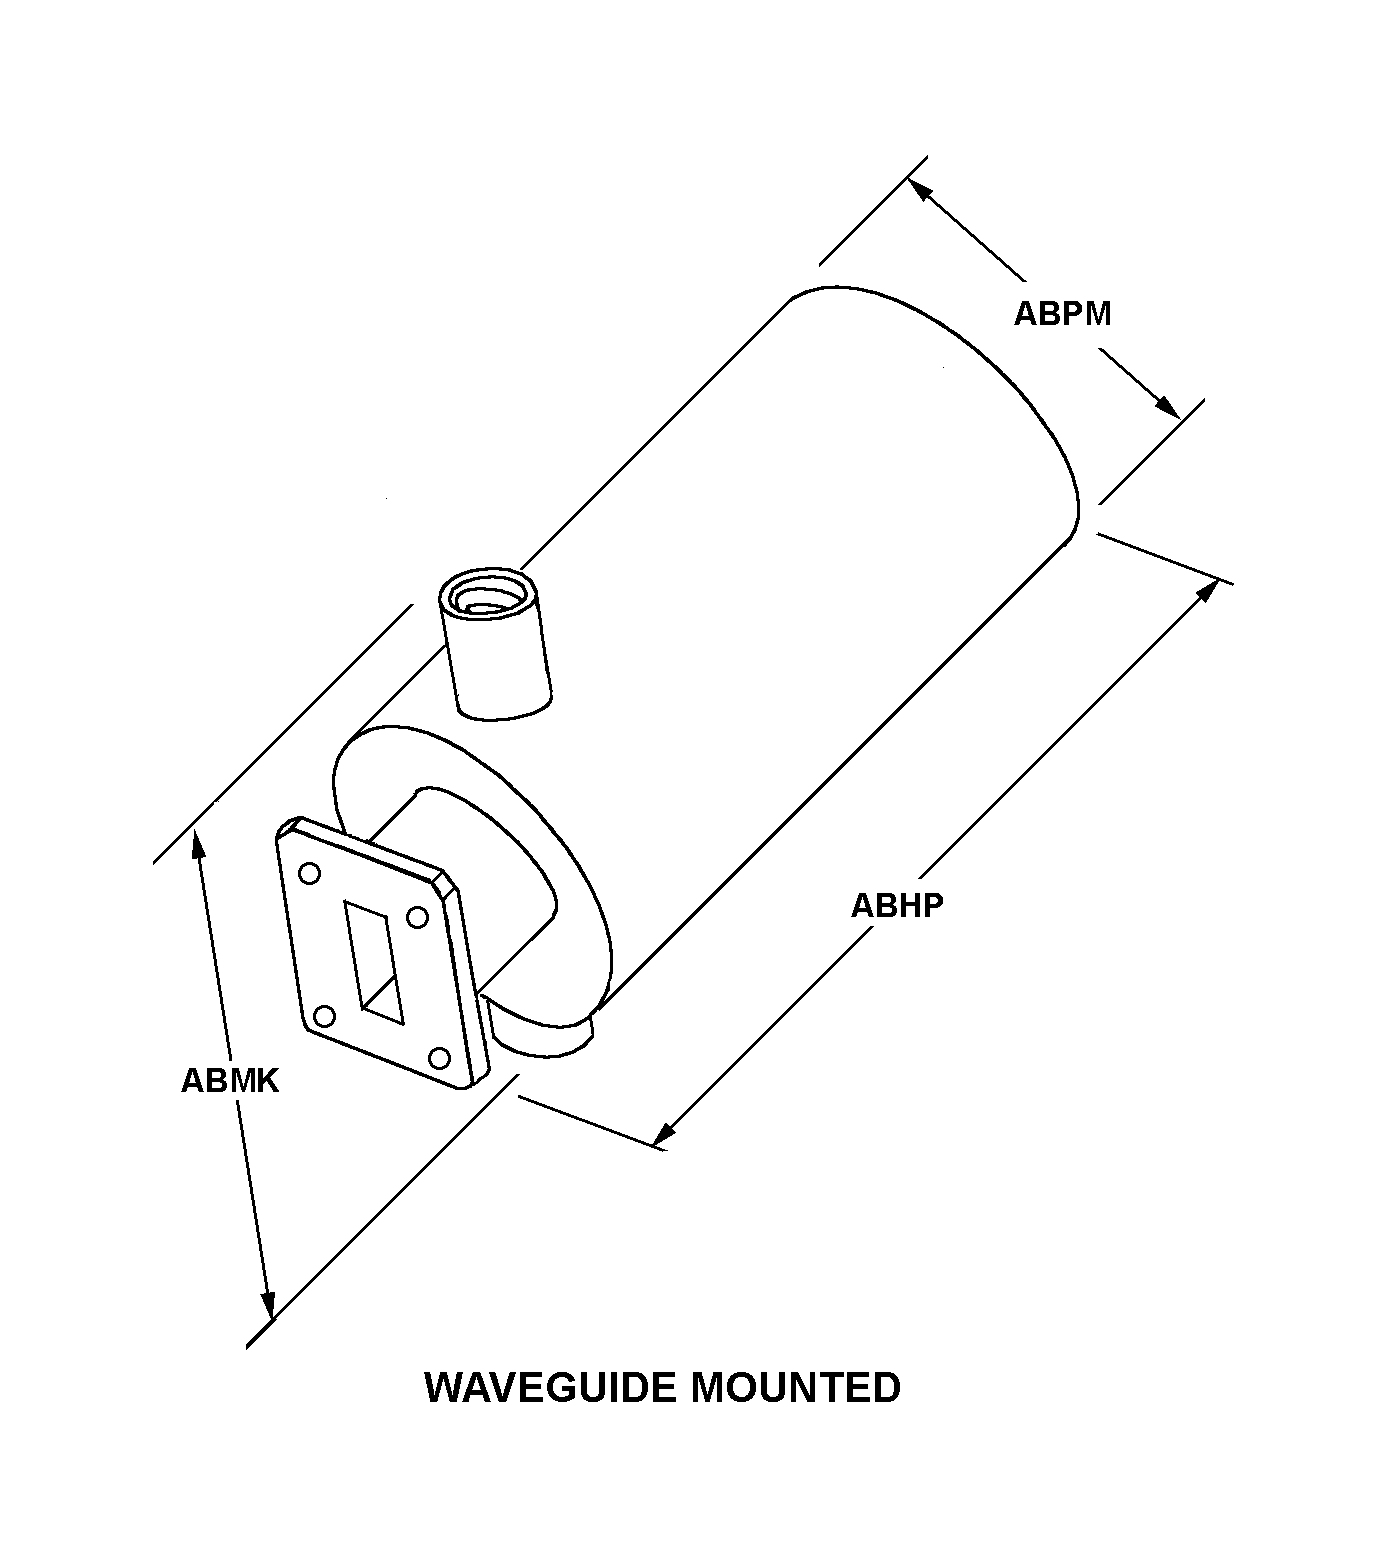 WAVEGUIDE MOUNTED style nsn 5985-01-100-3105